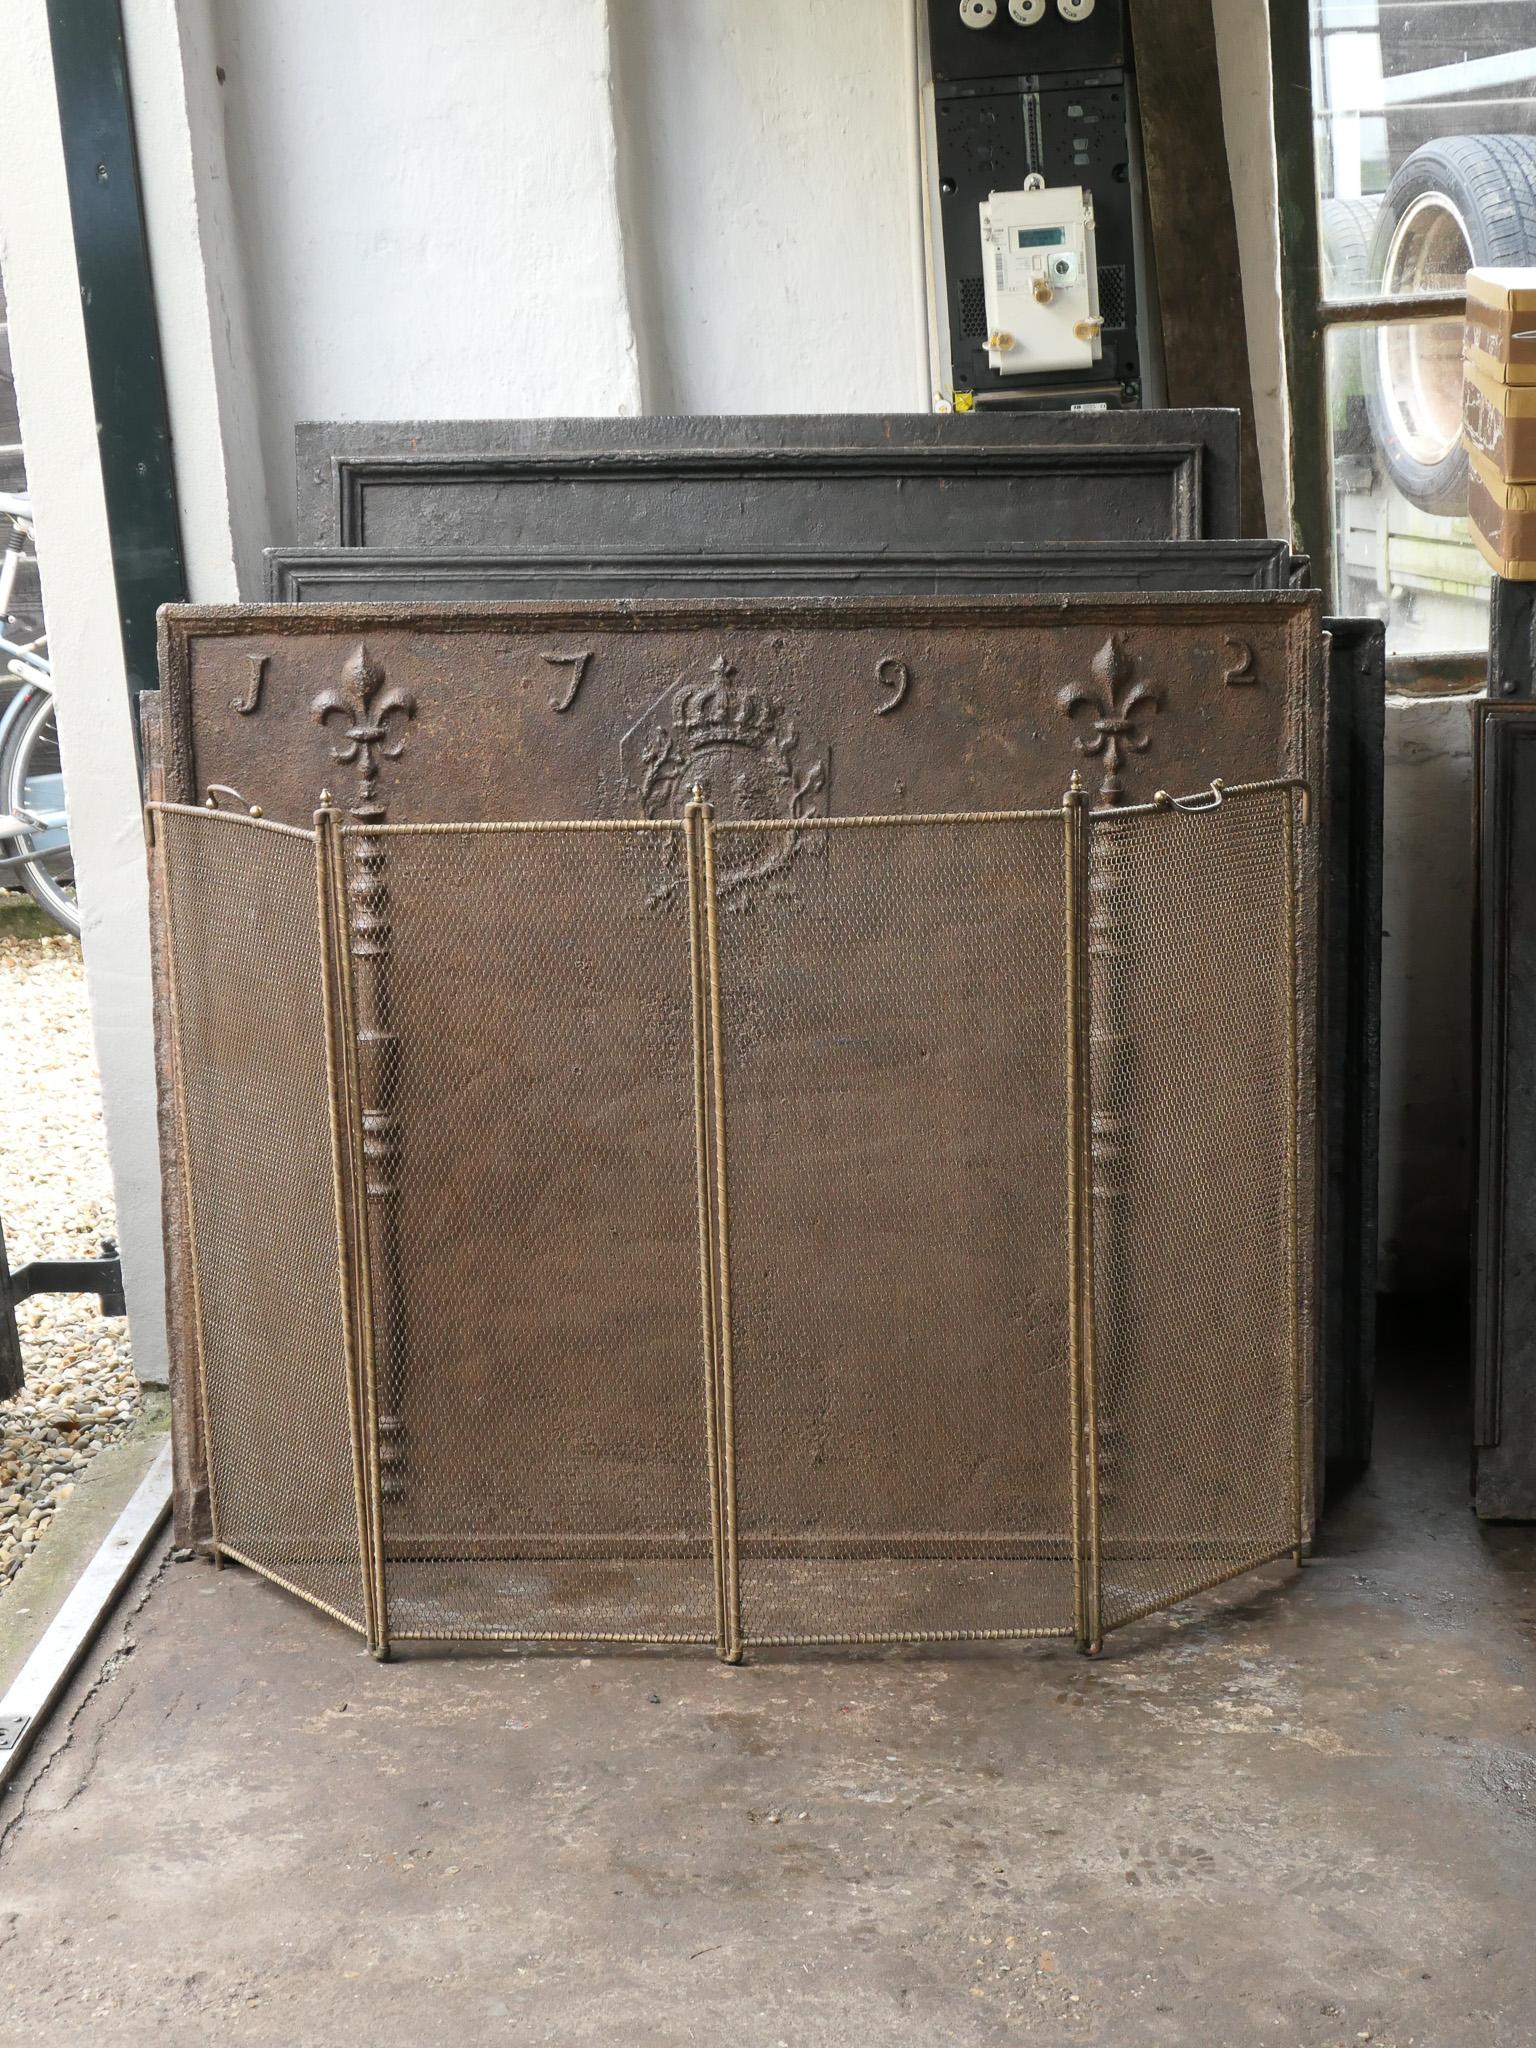 Tall 19th century French Napoleon III 4-panel fireplace screen. The screen is made of brass, iron and iron mesh. It is in a good condition and is fit for use in front of the fireplace.